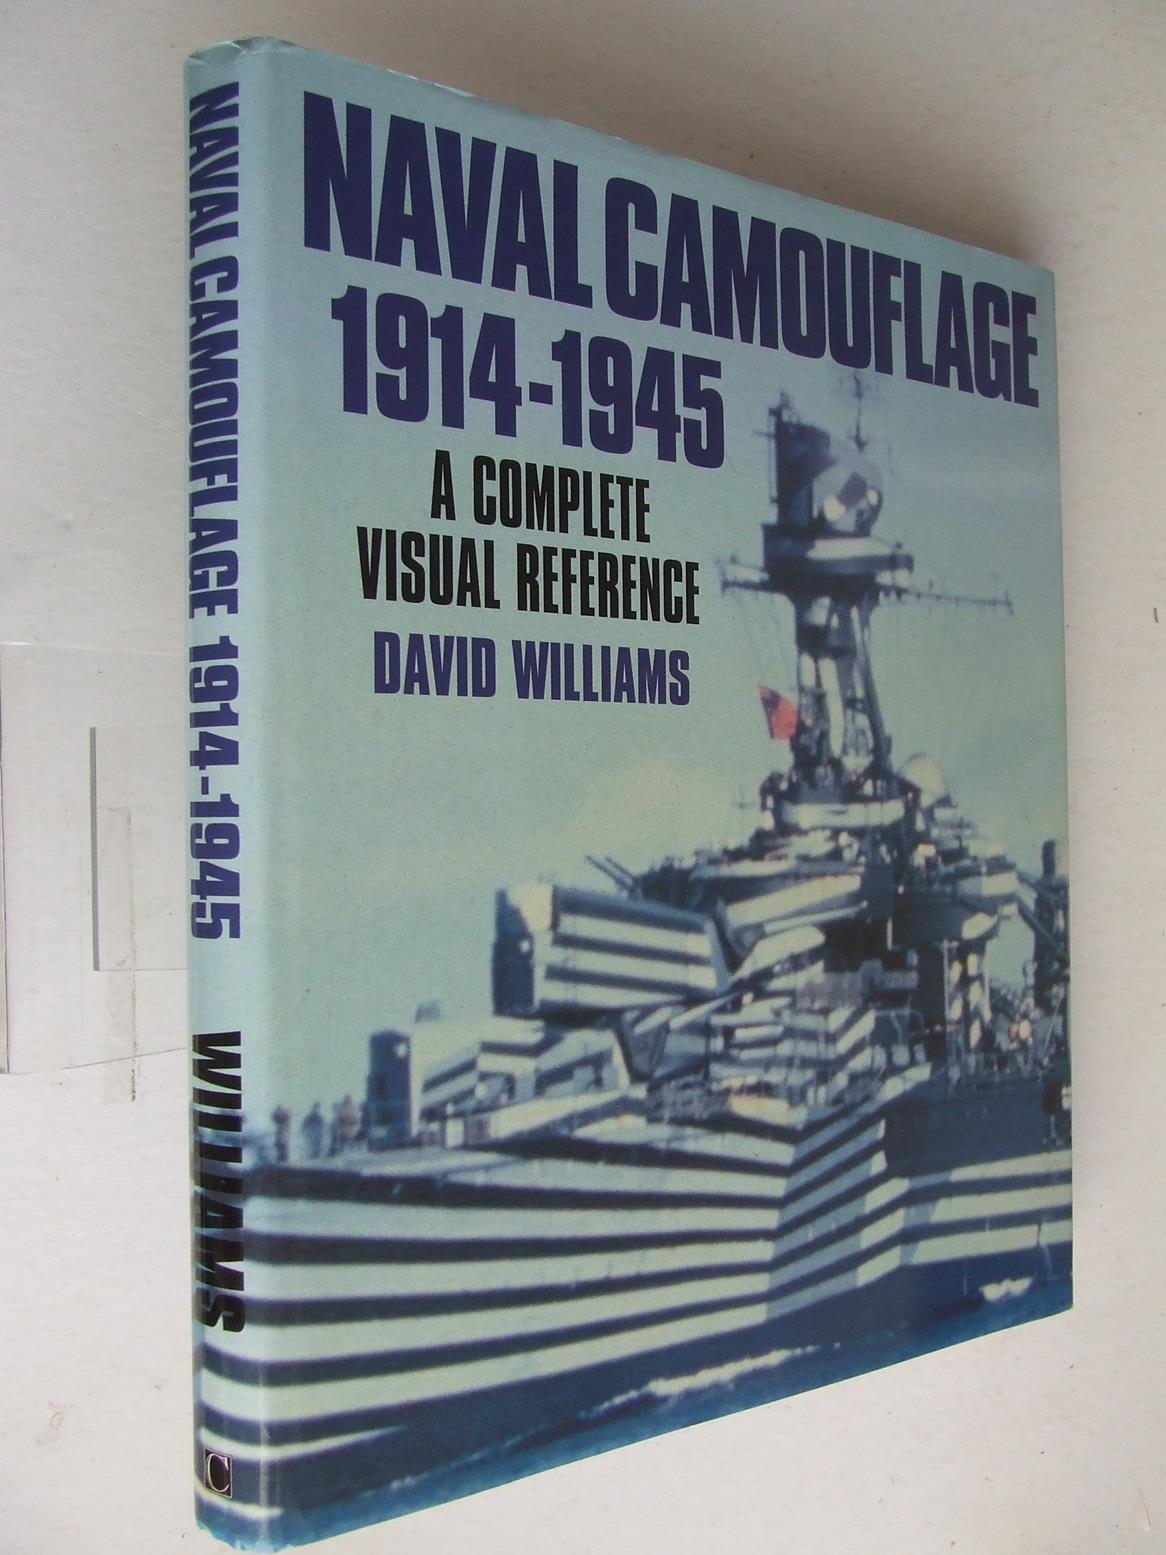 Naval Camouflage 1914-1945, a complete visual reference